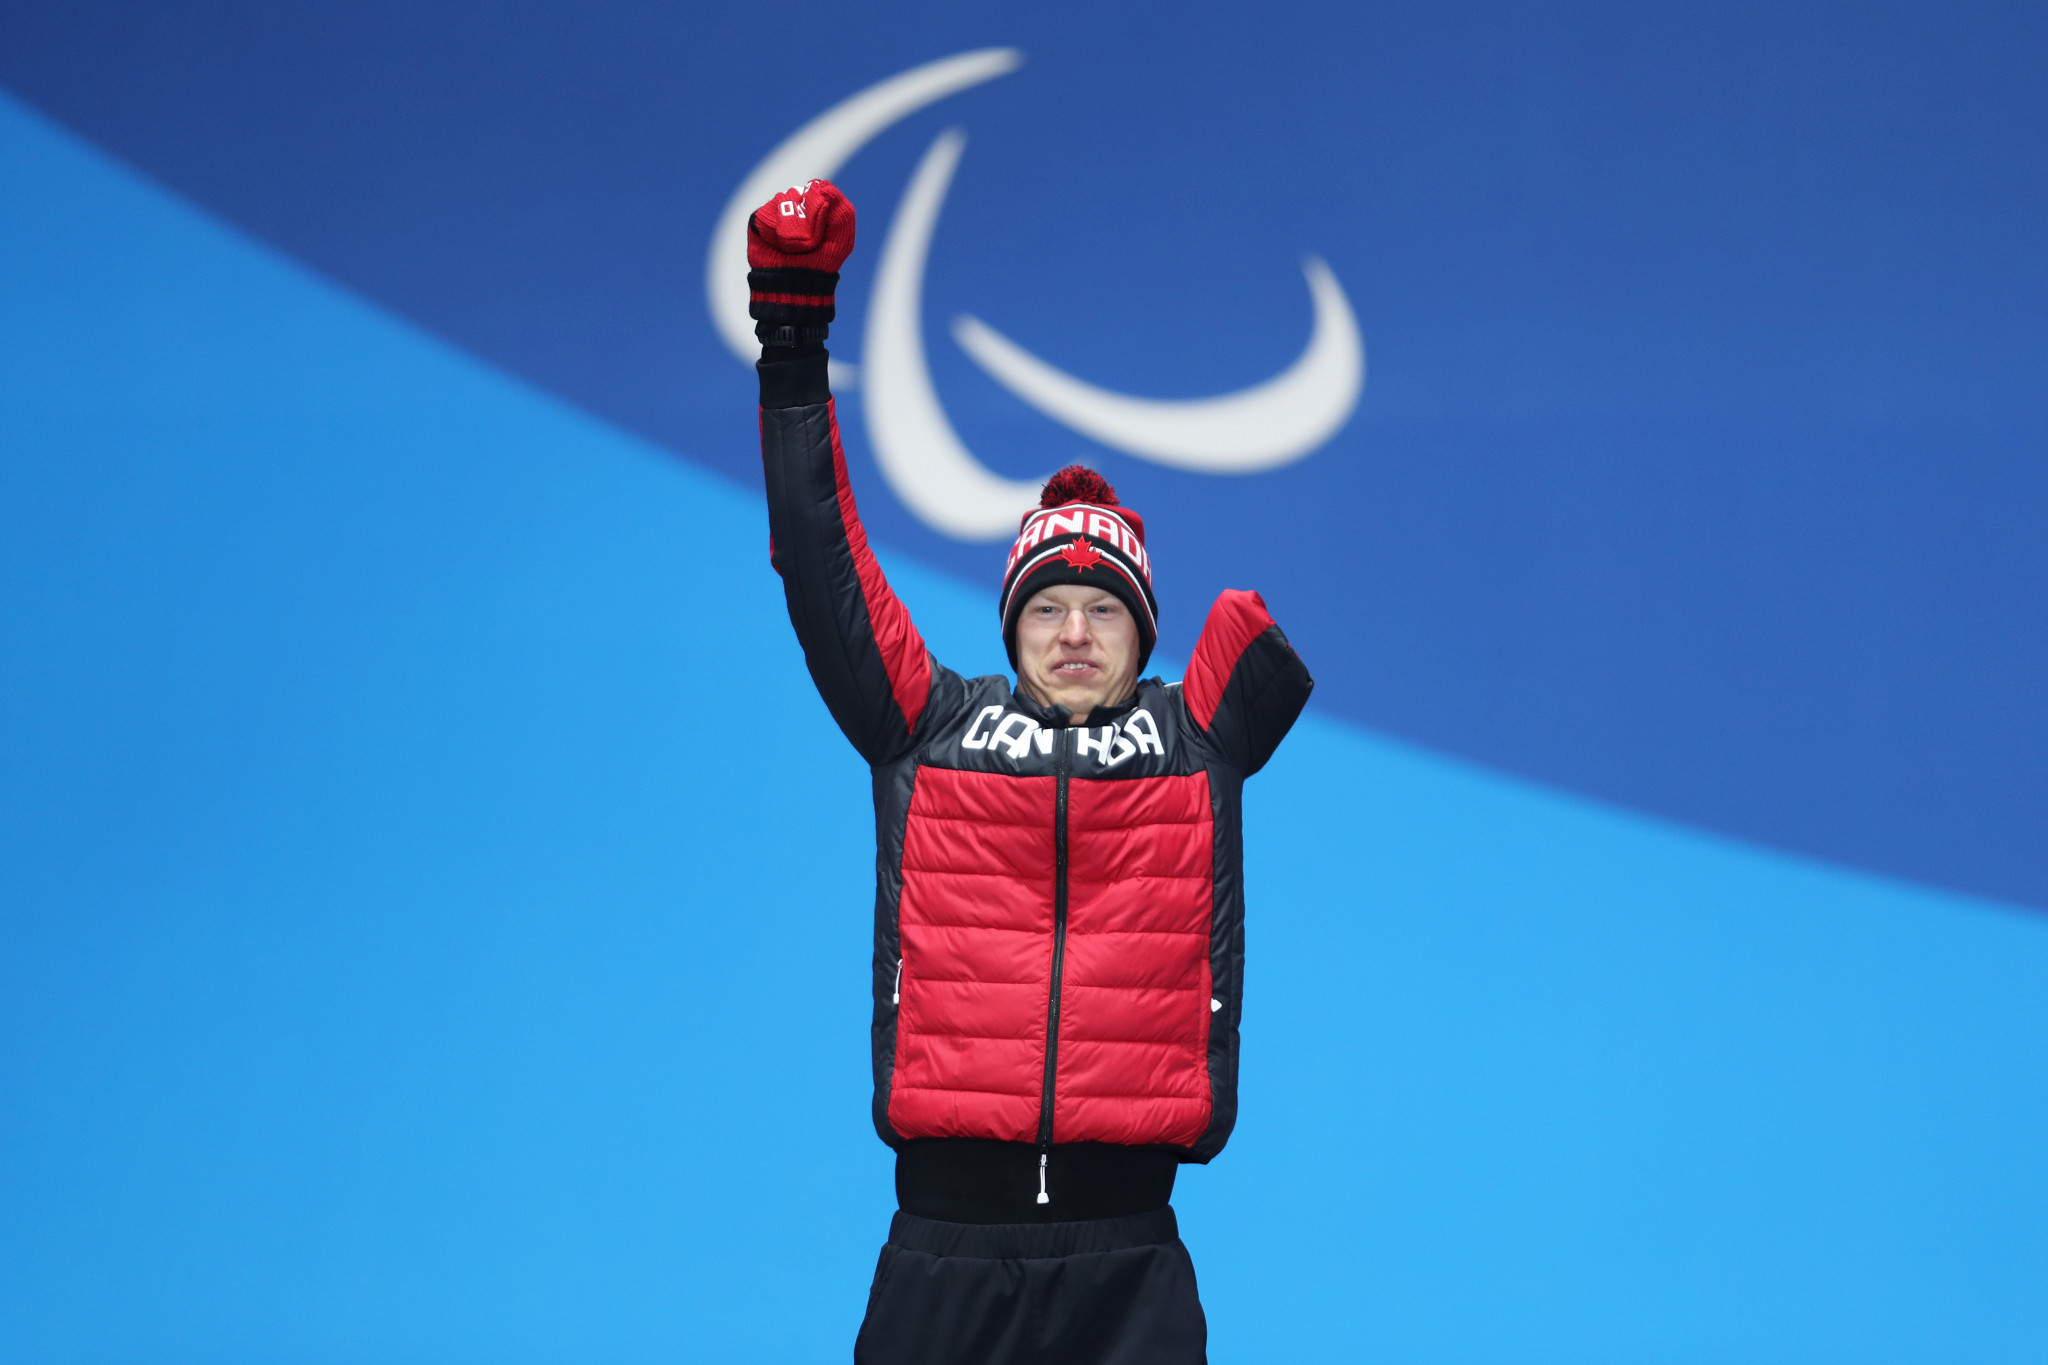 Canada's Mark Arendz, who won six medals at the 2018 Pyeongchang Winter Games, has spoken of his excitement for the upcoming season ©Getty Images